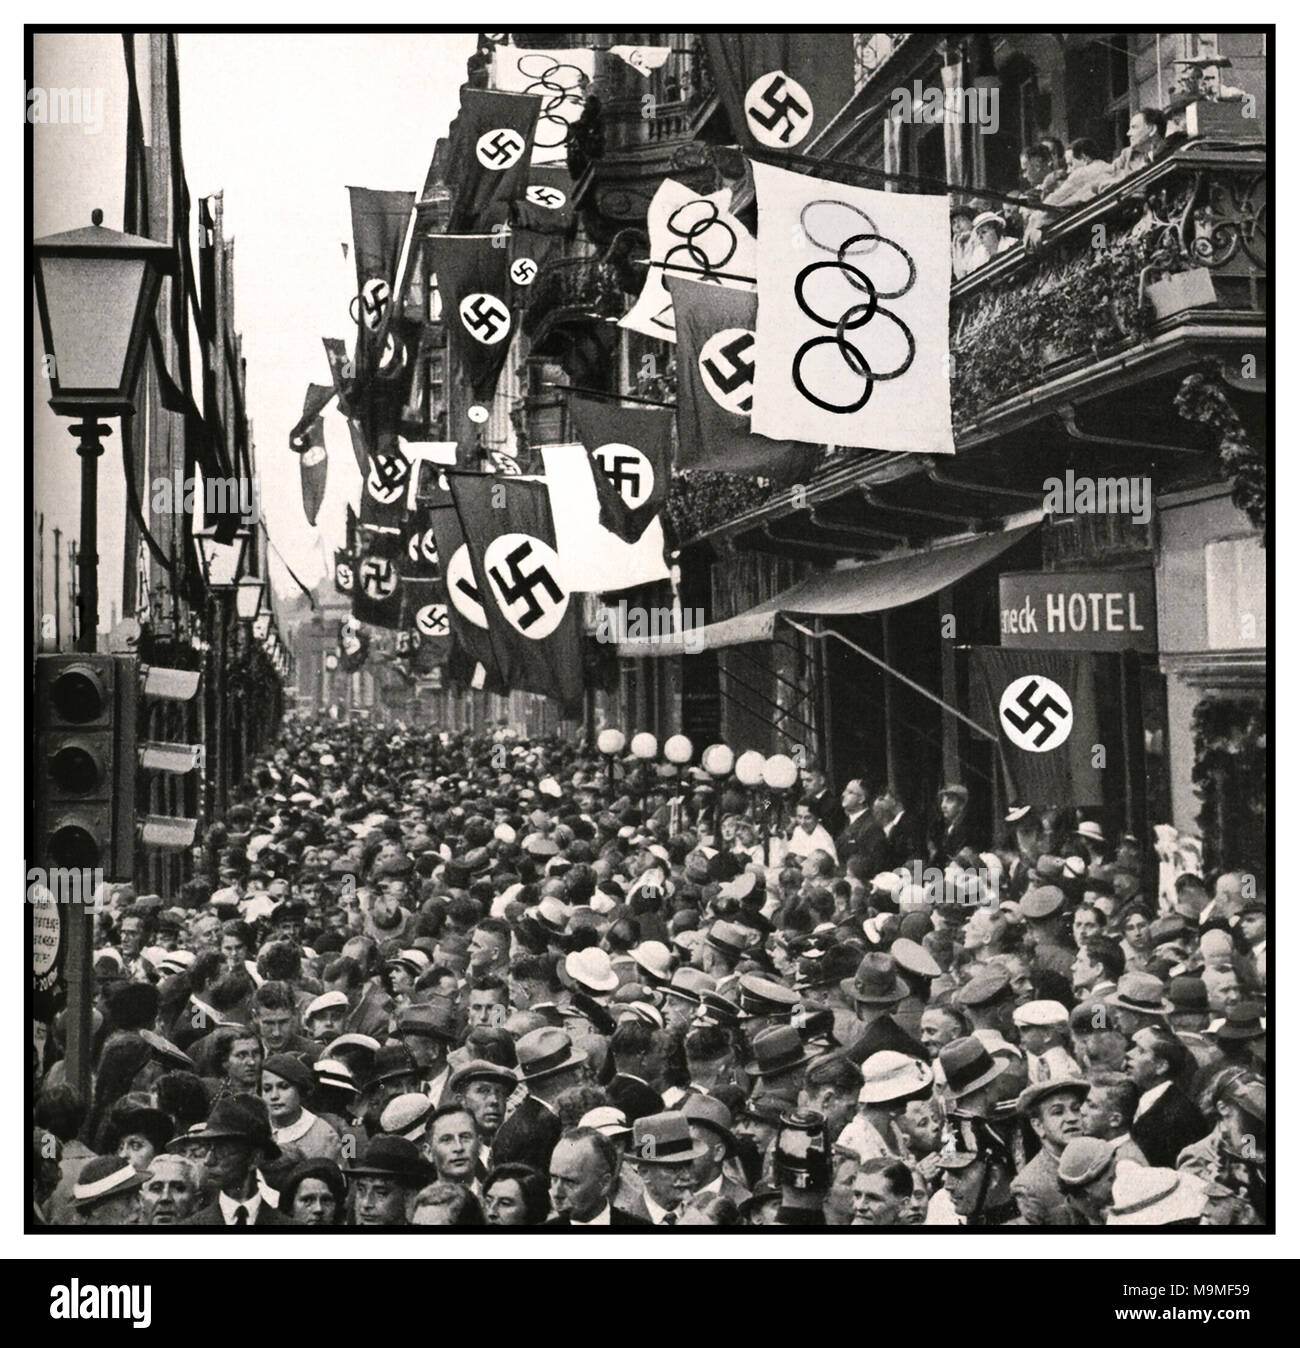 Vintage B&W image of a crowded street in Berlin with Swastikas and Olympic flags flying, celebrating the 1936 Olympics in Berlin Germany, under the government controlled Nazi Party. (National Socialist German Workers Party). These Olympic Games offered a unique view into Germany and the Nazi movement that had taken control of the country. Stock Photo